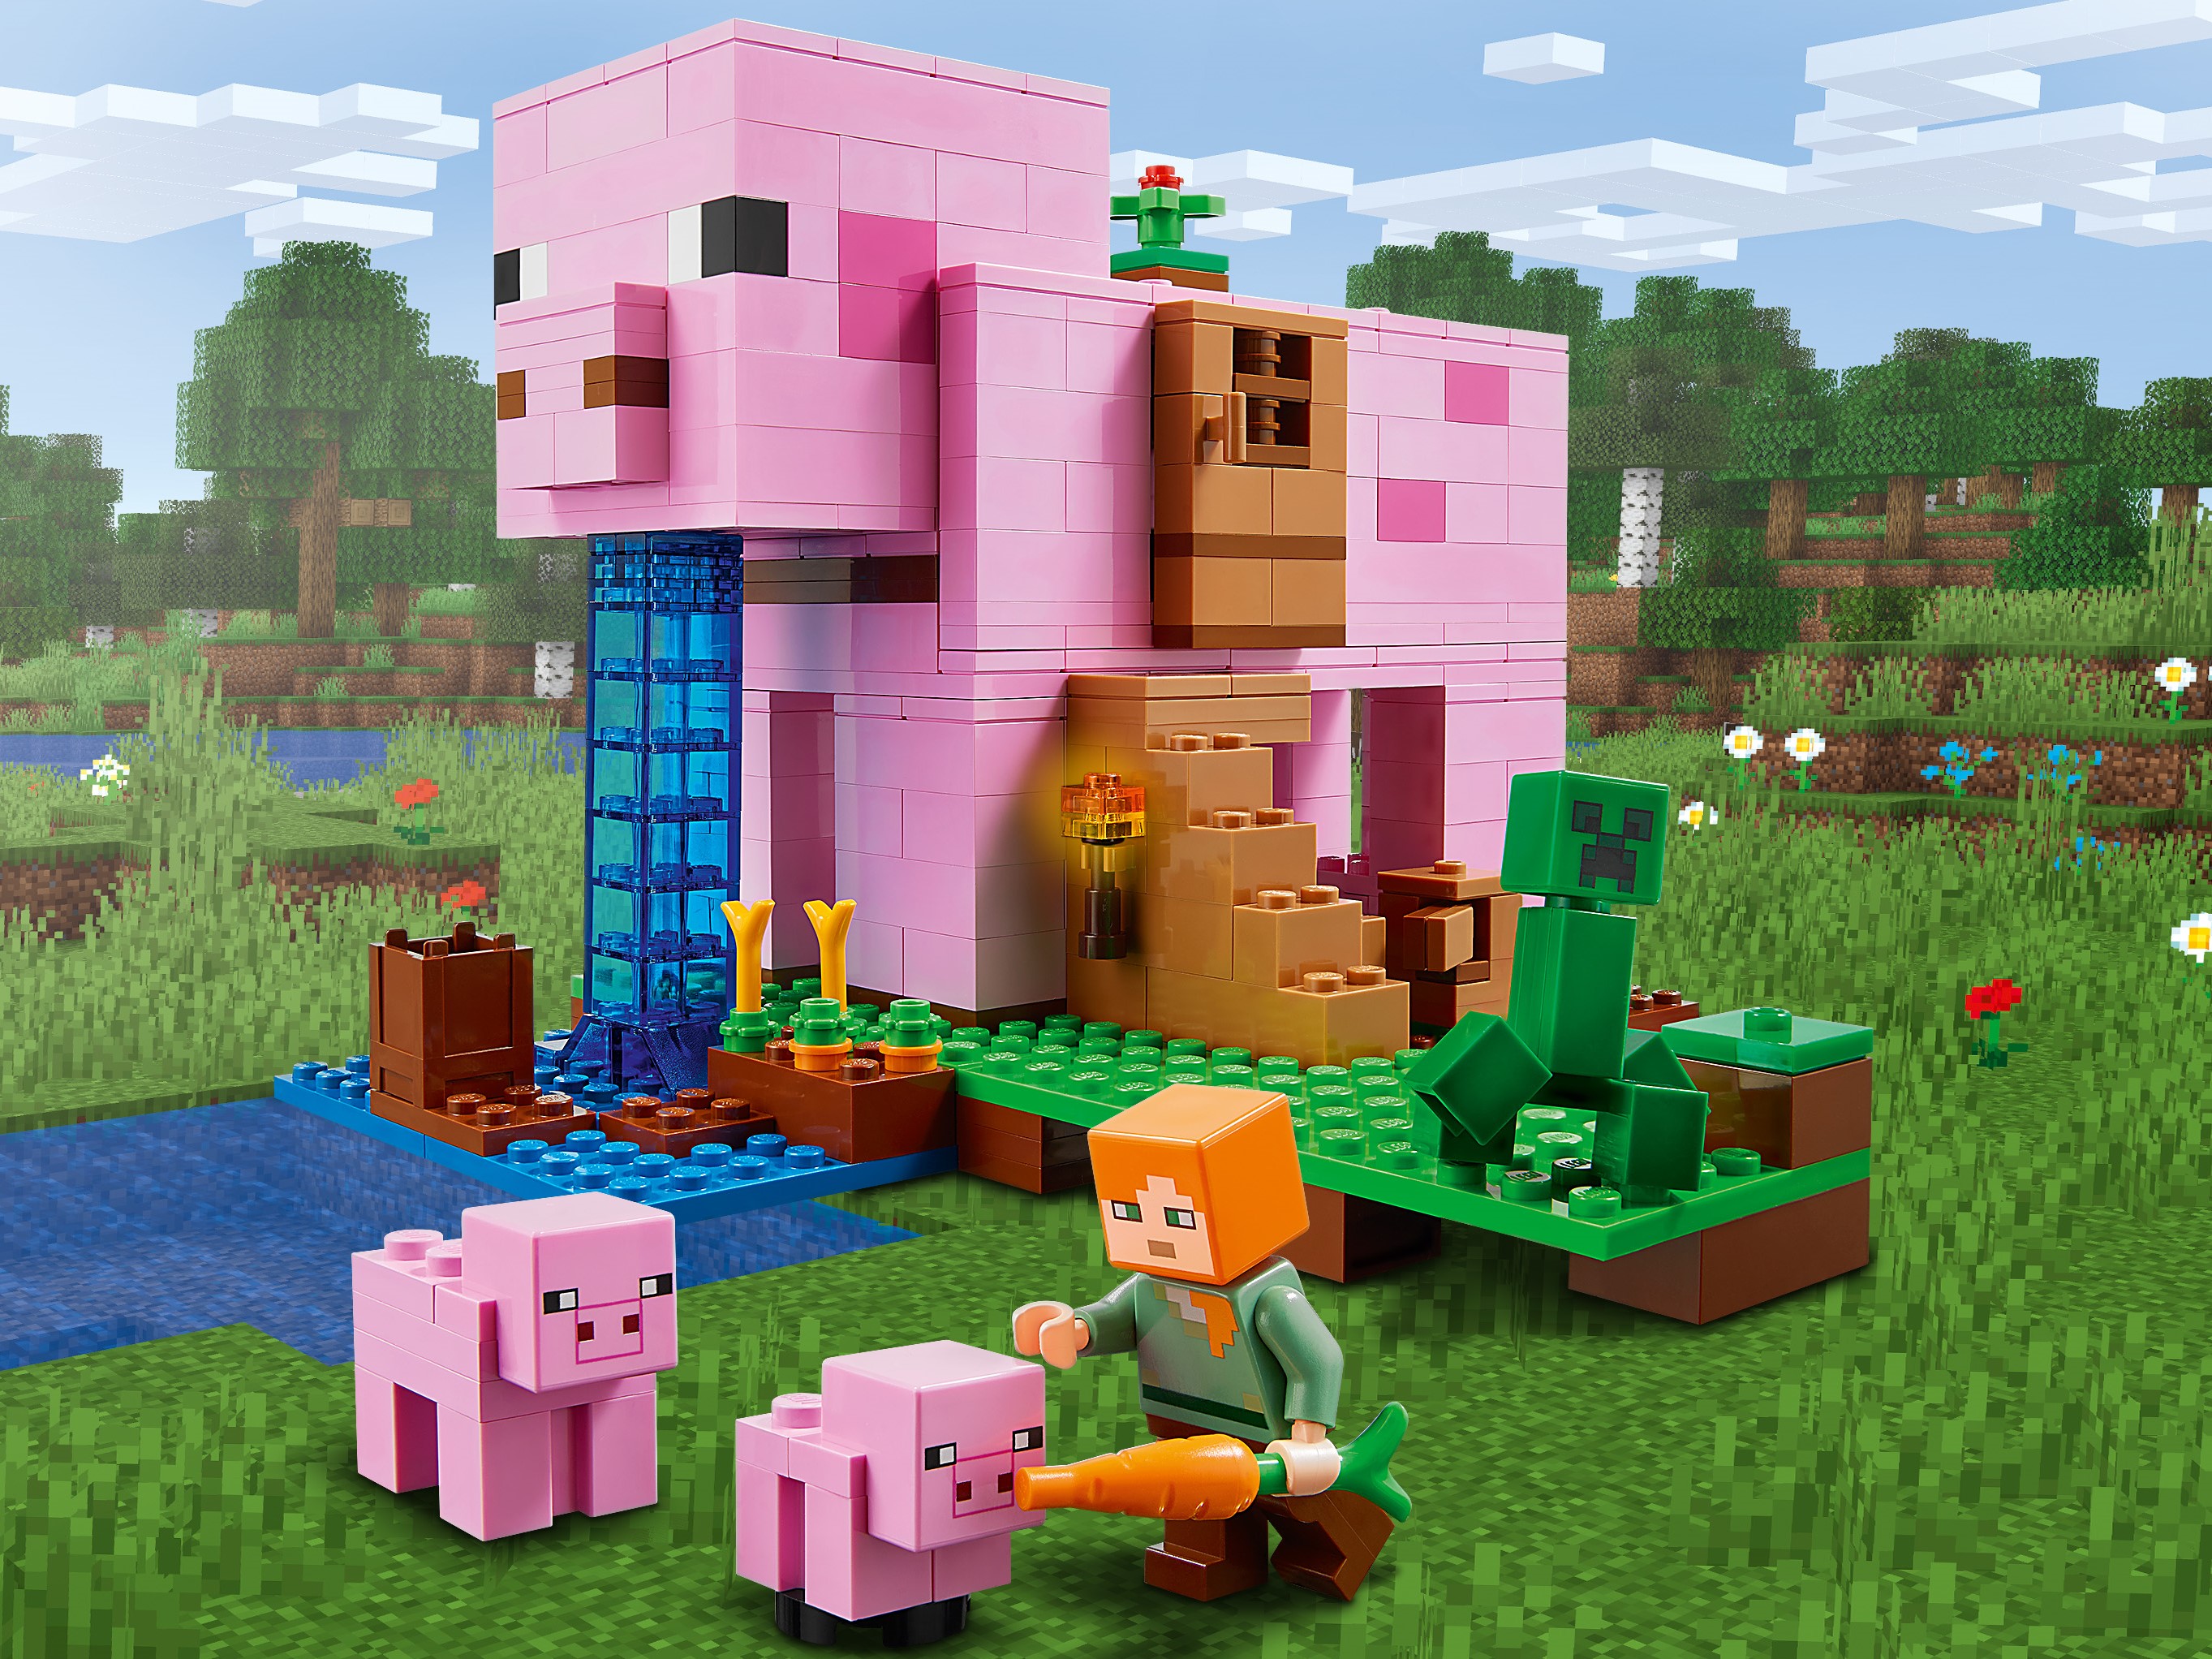 The Pig House 21170 | Minecraft® | Buy online at the Official LEGO® Shop US